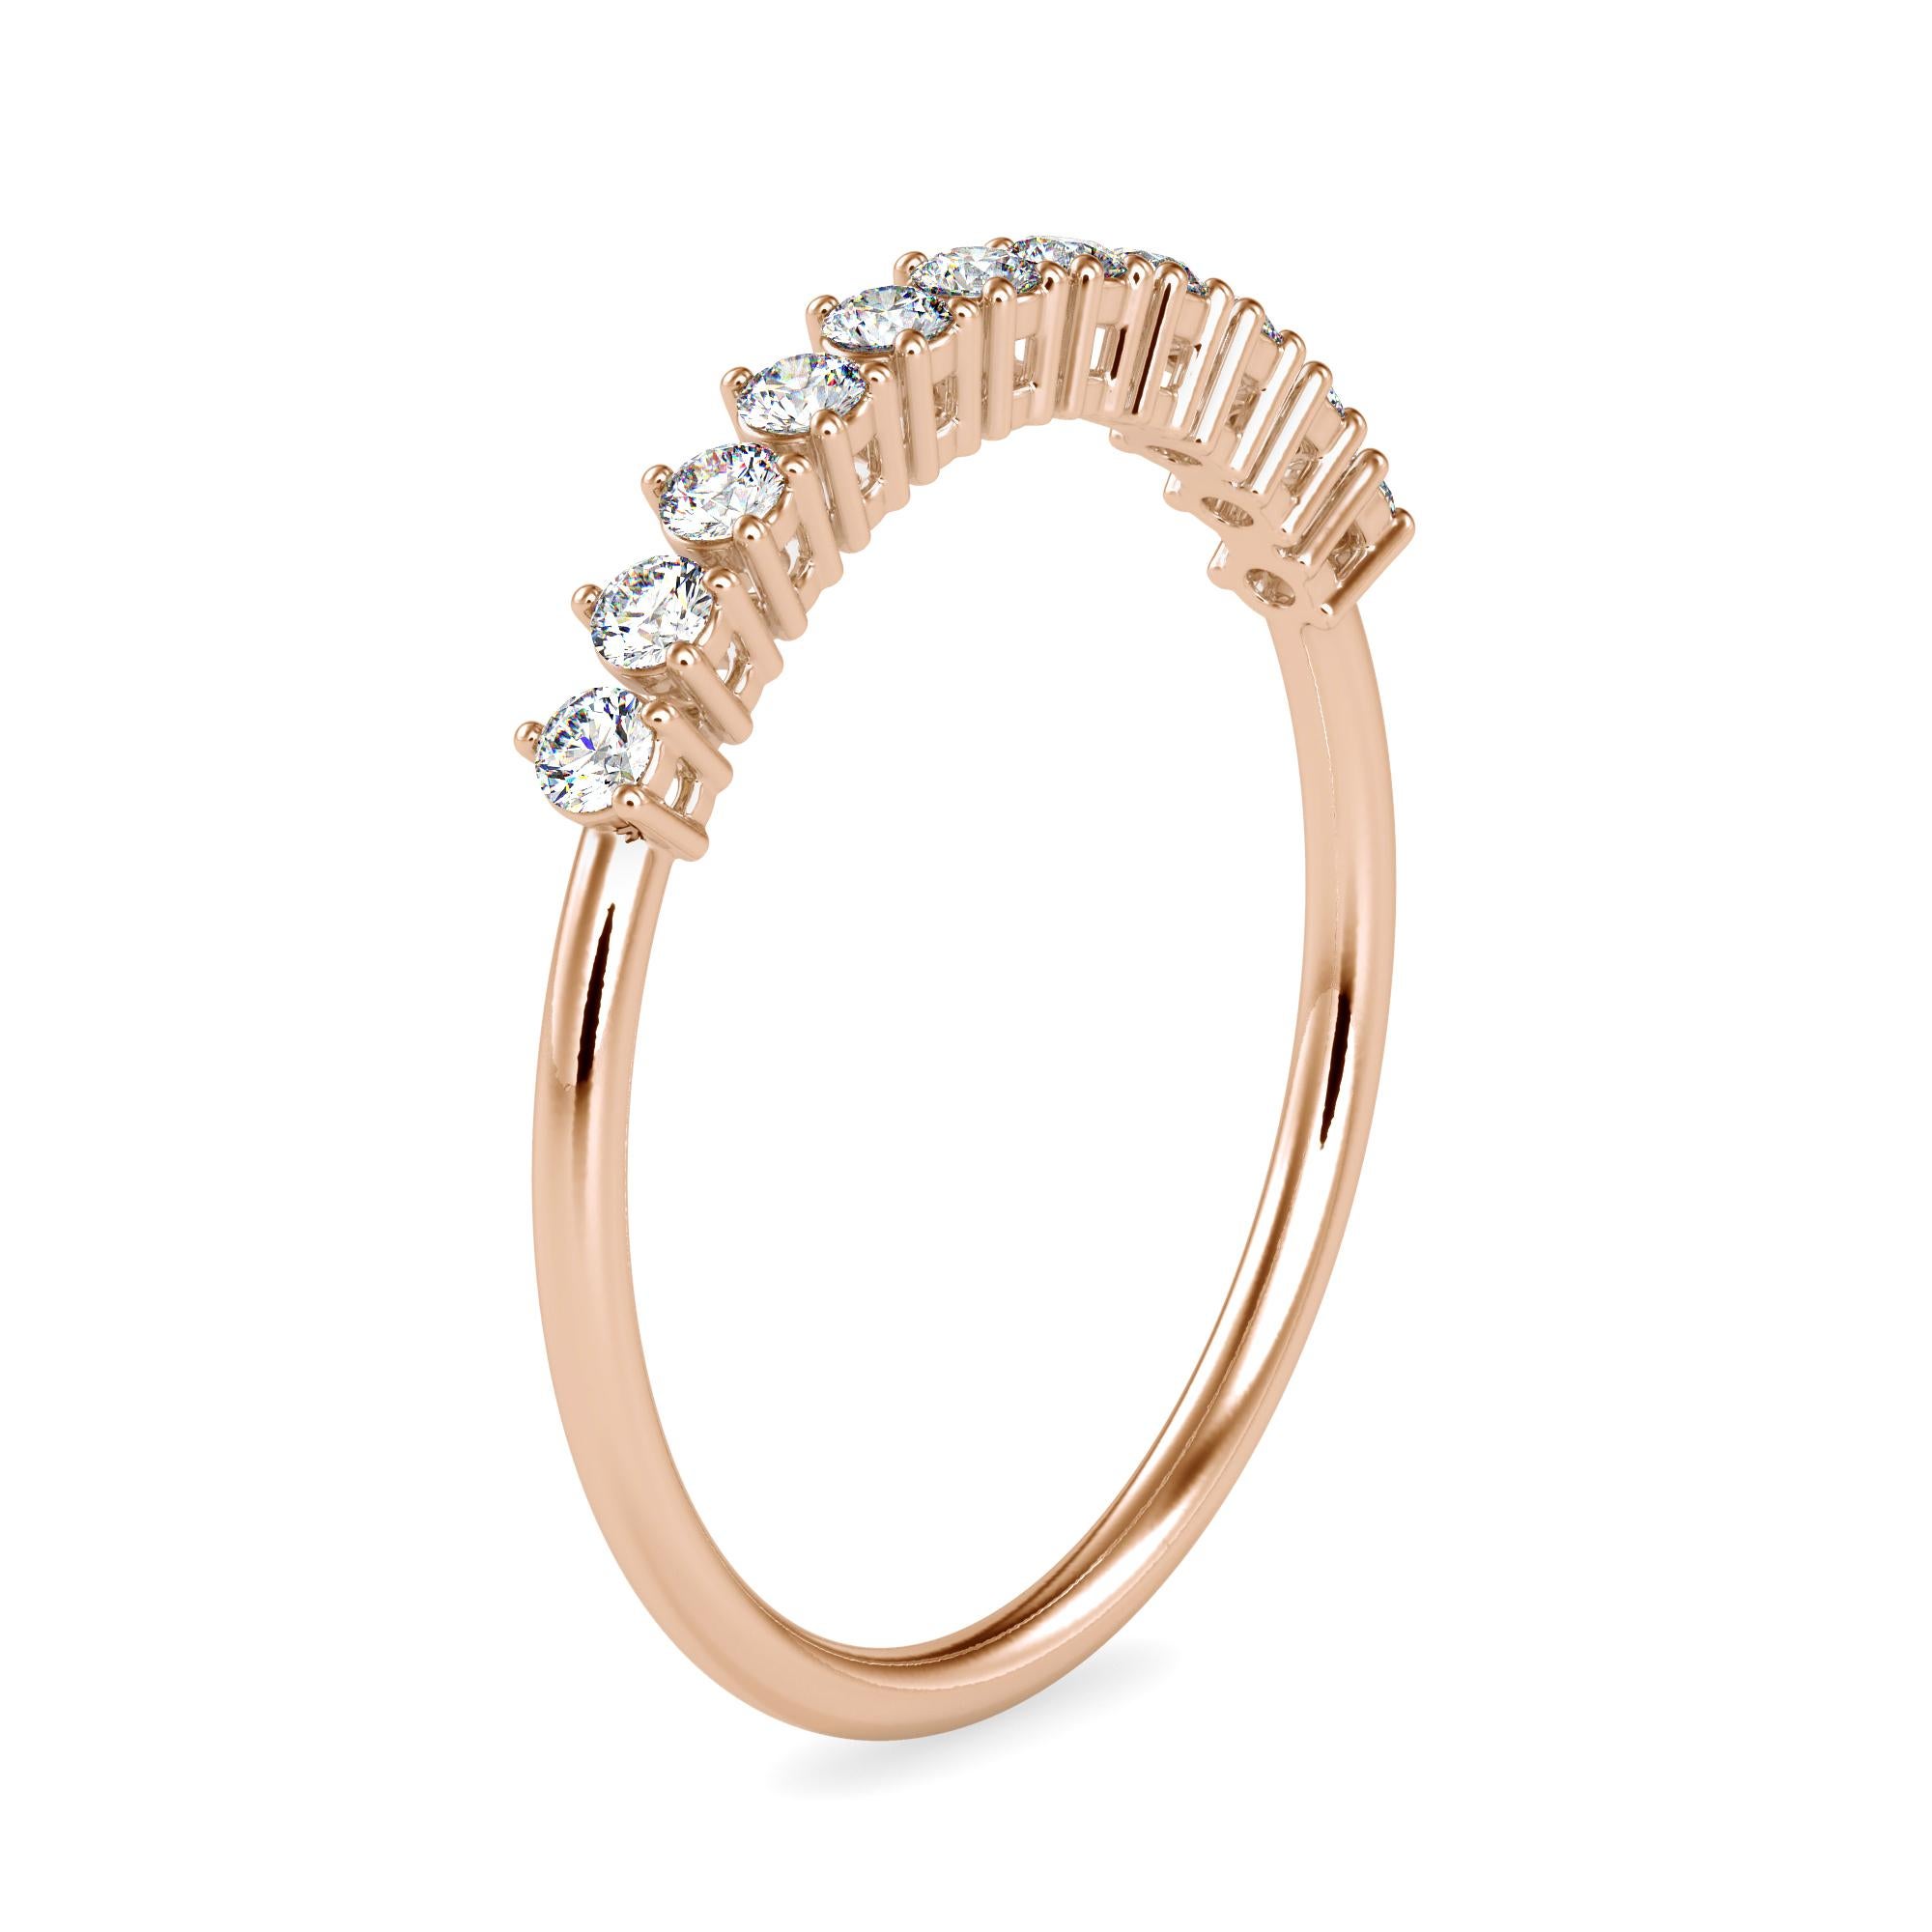 0.24 Carat Diamond 14K Rose Gold Ring In New Condition For Sale In Manhattan Beach, CA